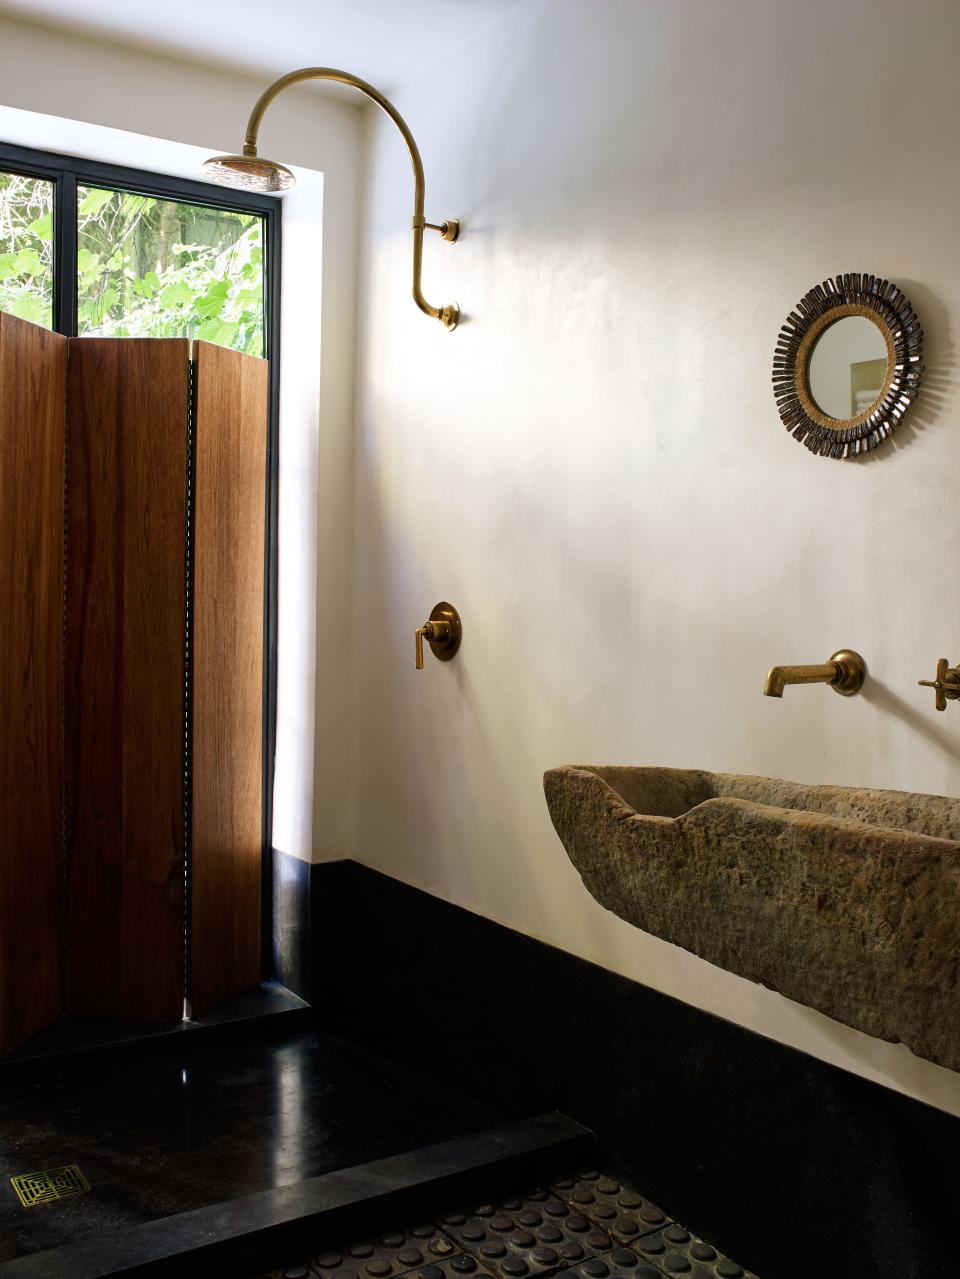 In the downstairs bathroom, Tedhams used one of the antique troughs as a sink, pairing it with an unlacquered brass faucet and showerhead from Waterworks. Above it hangs a mirror by French artist Line Vautrin, a highly collectible piece from the 1950s. The wooden privacy screen was made by Erik Gustafson. “Only an interior designer could live with a bathroom this impractical,” jokes Tedhams.